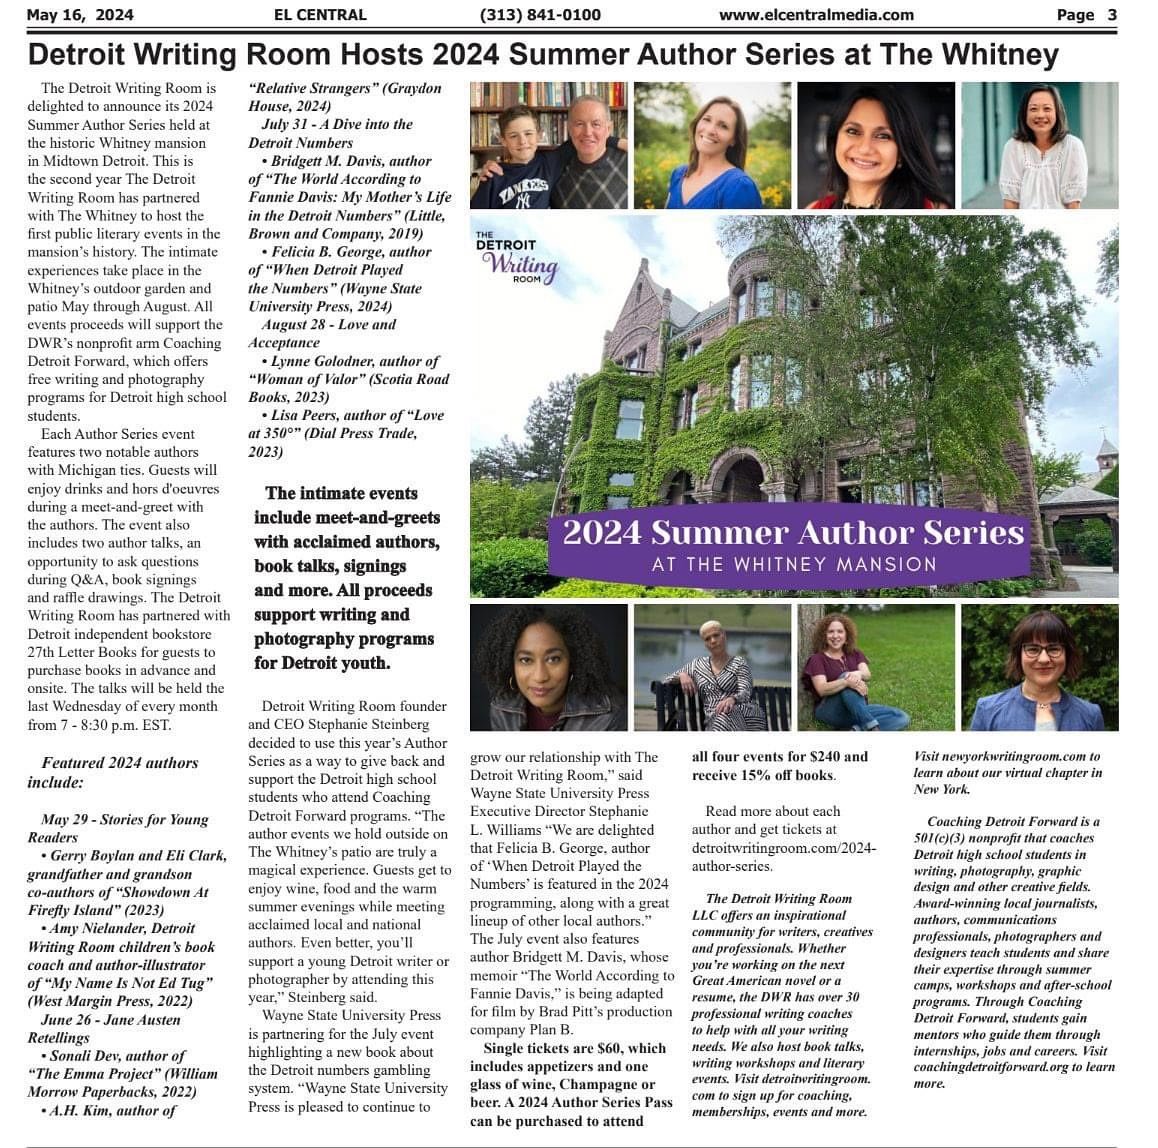 Hot off the press! Our Summer Author Series is highlighted in this week&rsquo;s issue of @elcentralmedia! 

You can read all about the upcoming events featuring local authors online or in the print issue out now! 

We can&rsquo;t wait to see everyone